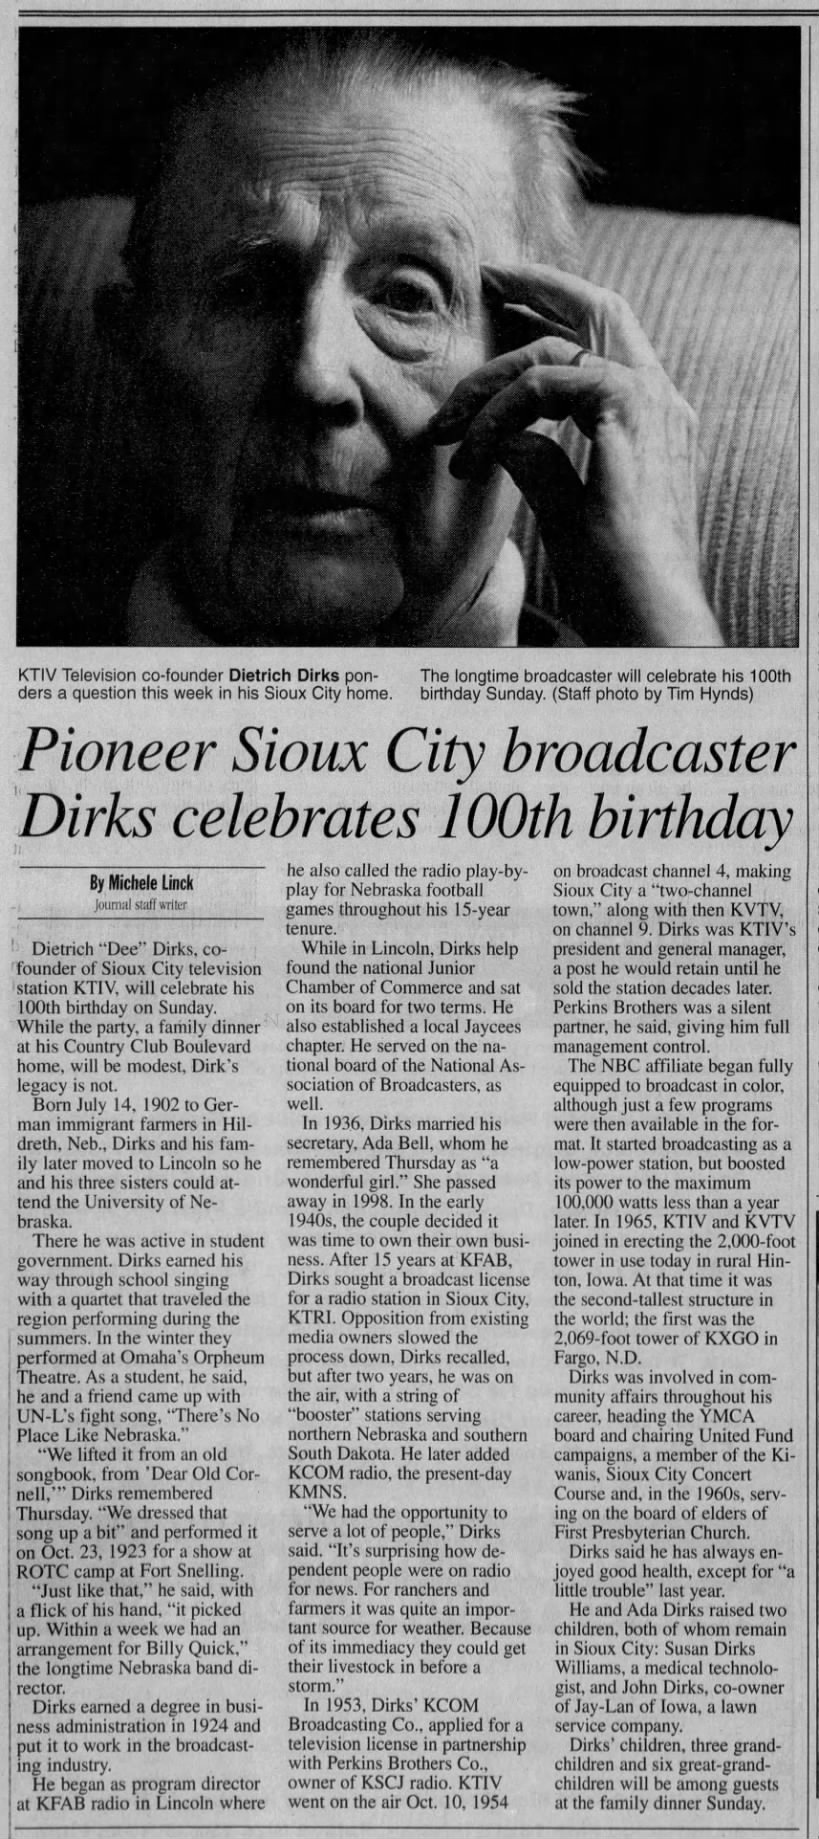 Pioneer Sioux City broadcaster Dirks celebrates 100th birthday